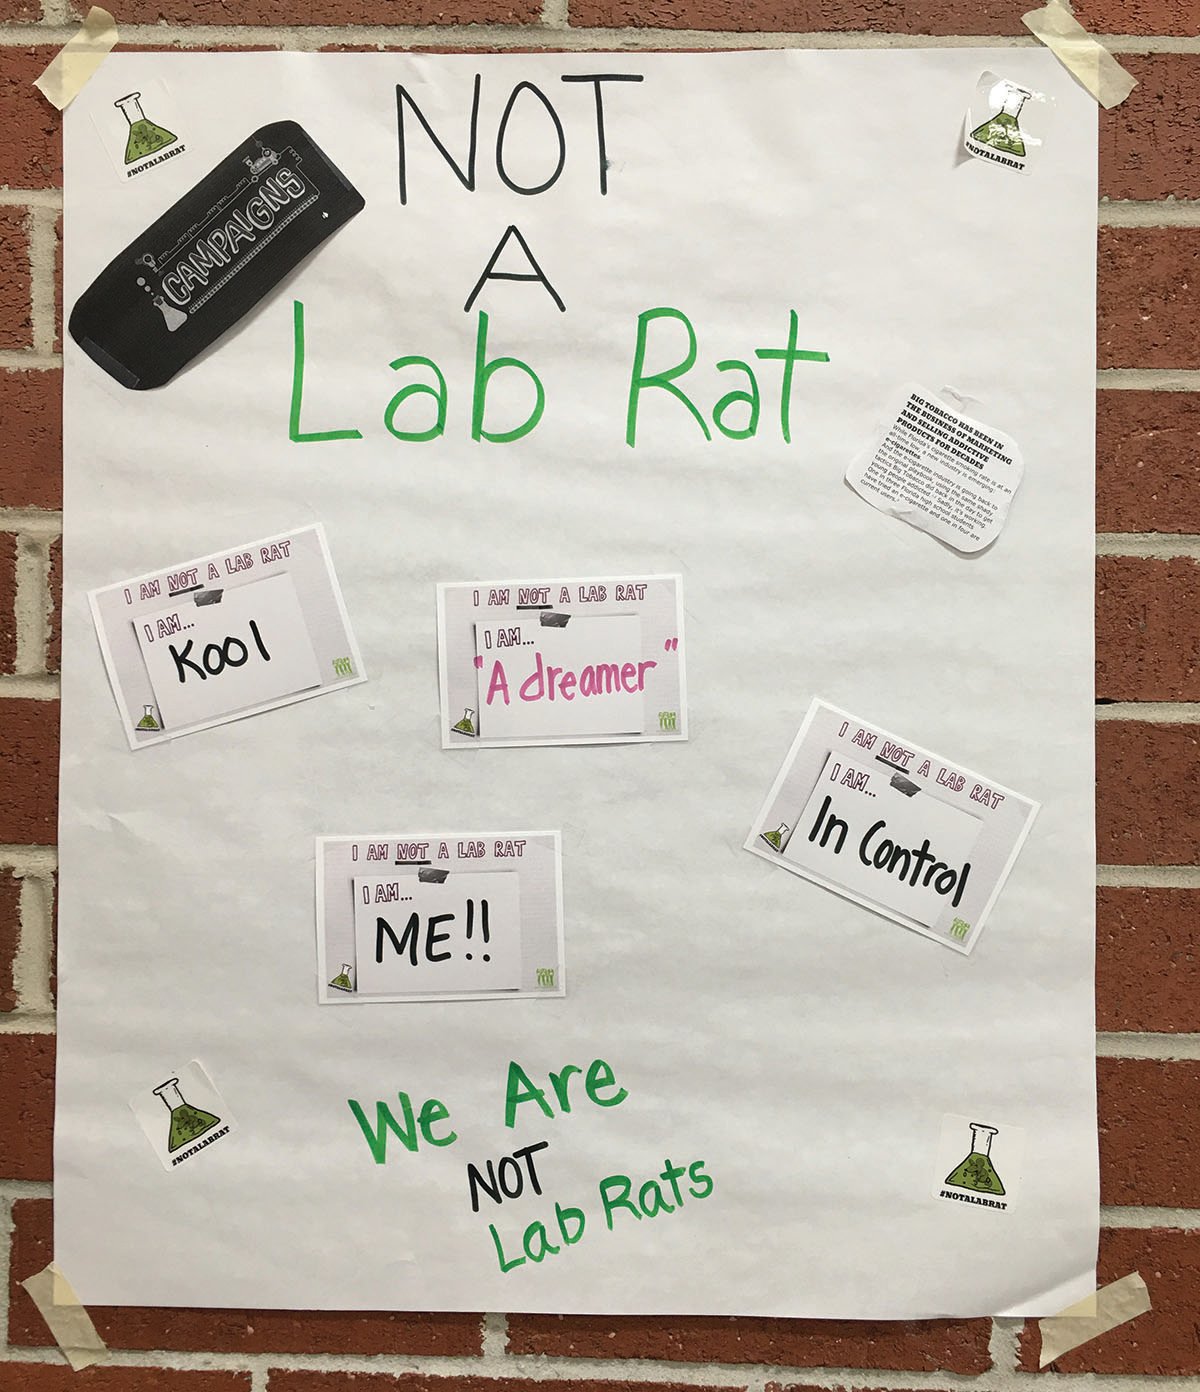 Pictured is a Not A Lab Rat campaign poster.